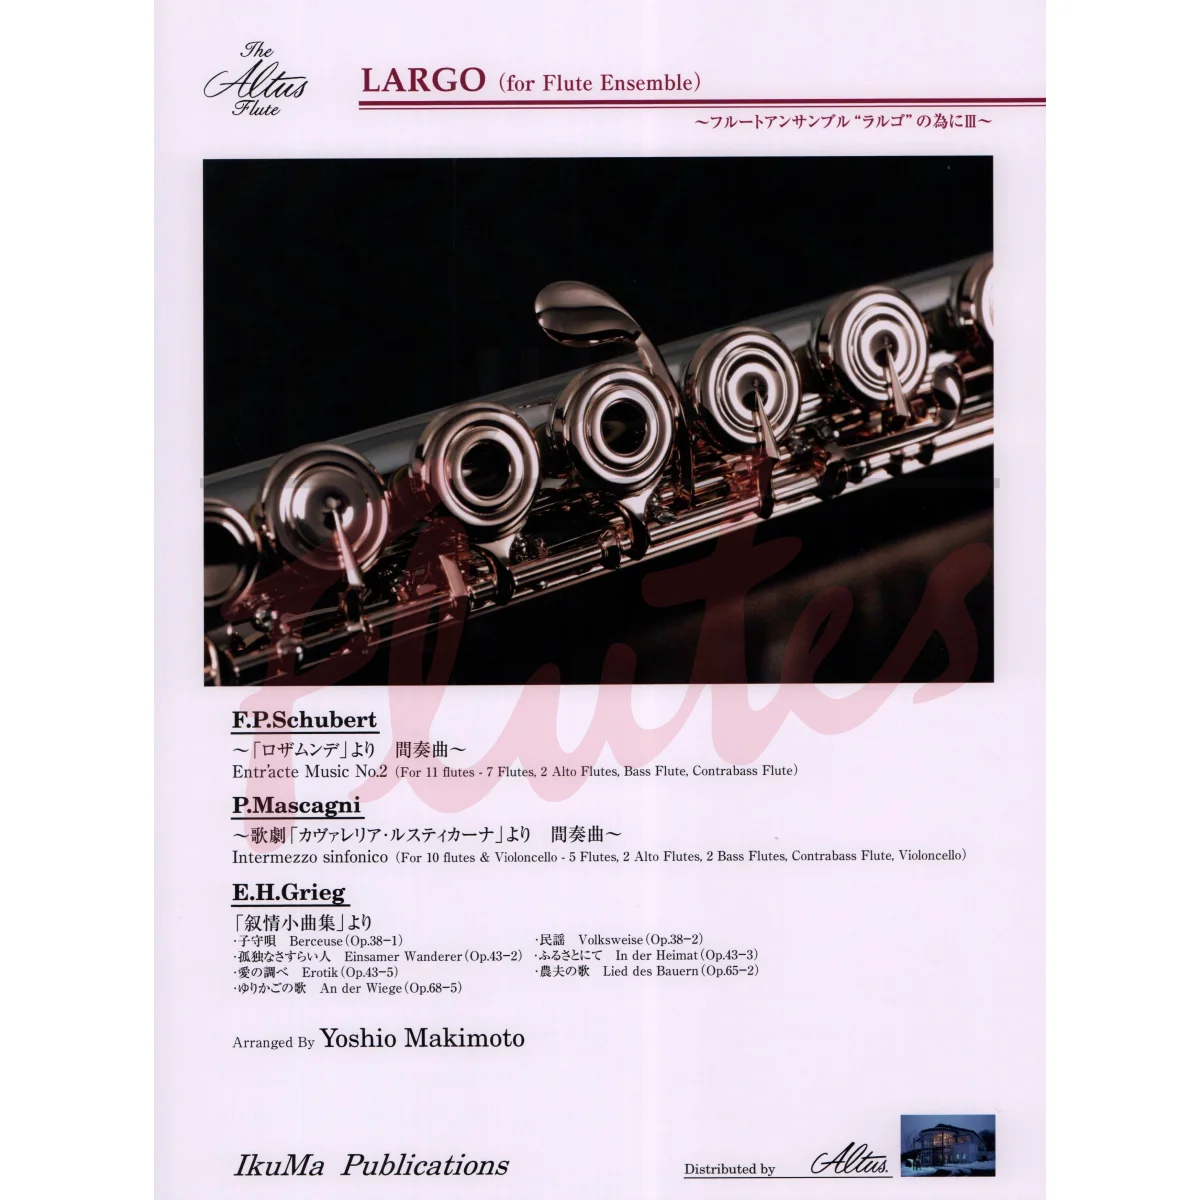 Largo: 9 Works by Schubert, Mascagni and Grieg for Flute Ensemble